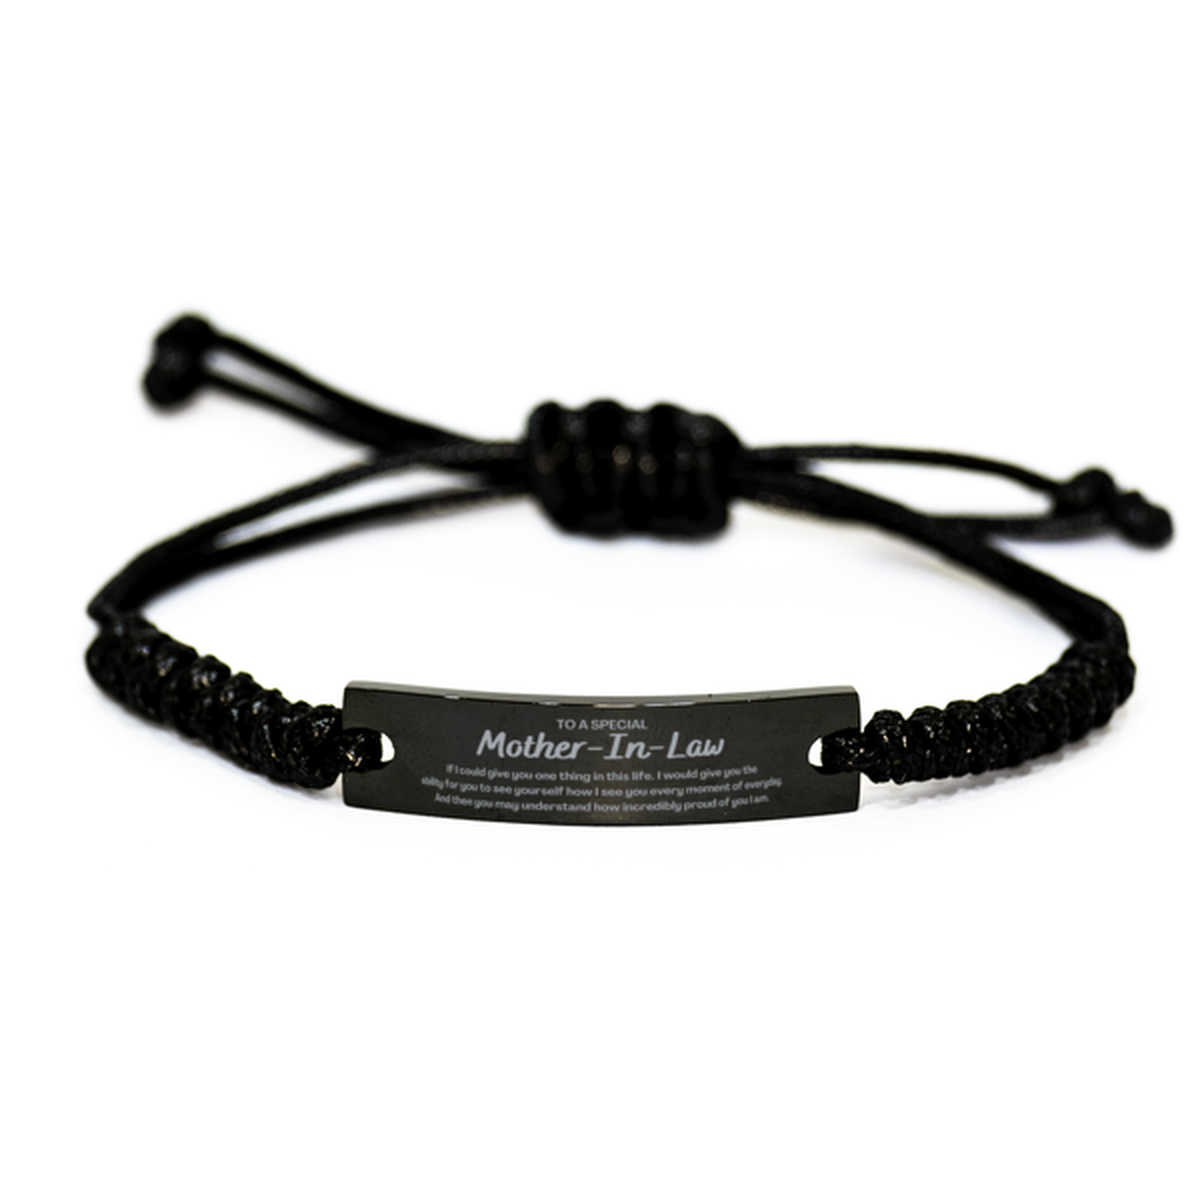 To My Mother-In-Law Black Rope Bracelet, Gifts For Mother-In-Law Engraved, Inspirational Gifts for Christmas Birthday, Epic Gifts for Mother-In-Law To A Special Mother-In-Law how incredibly proud of you I am